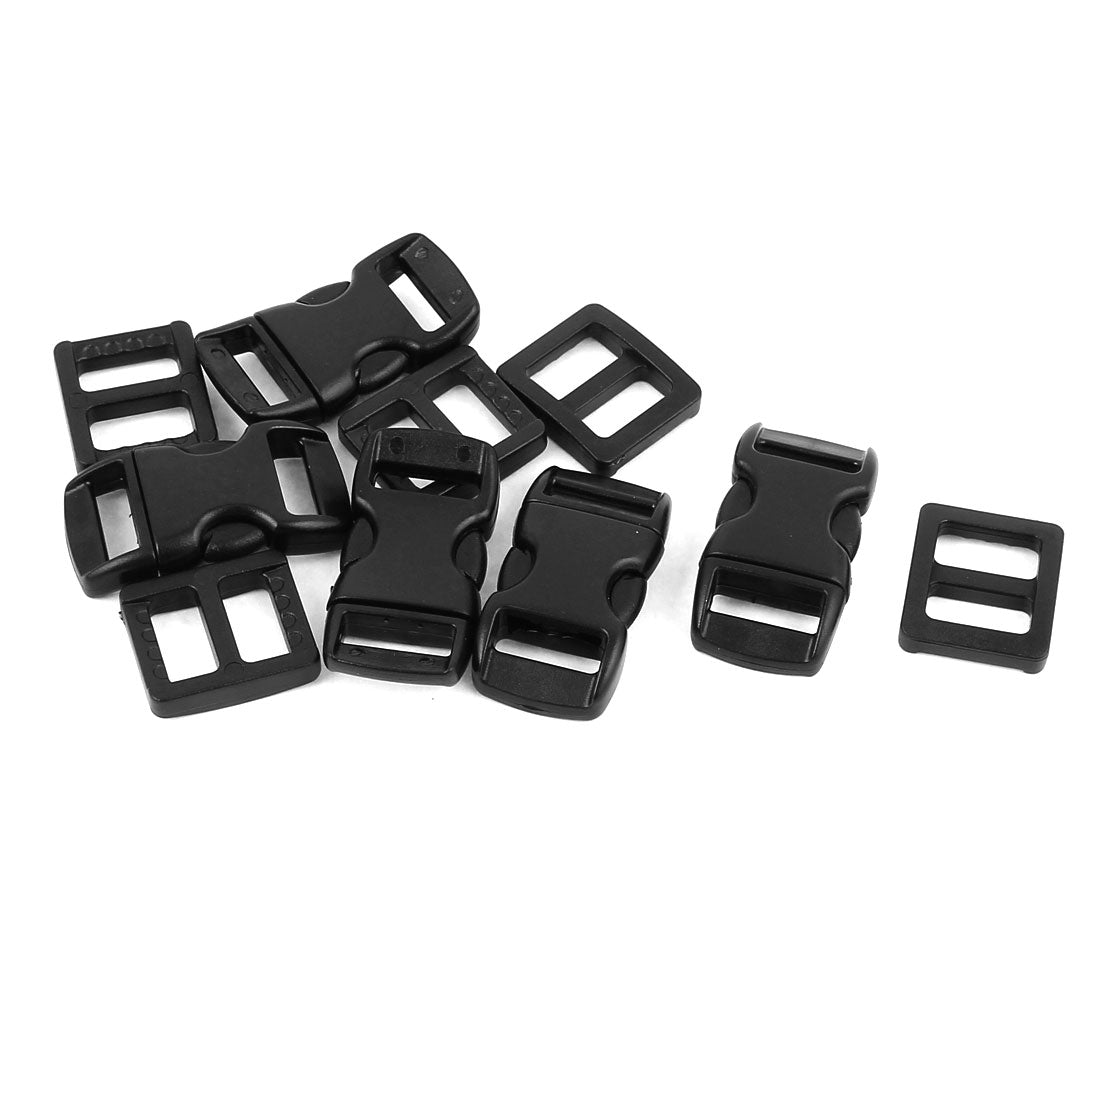 uxcell Uxcell 5pcs Black Plastic Packbag Side Quick Release Clasp Buckles for 10-11mm Webbing Strap